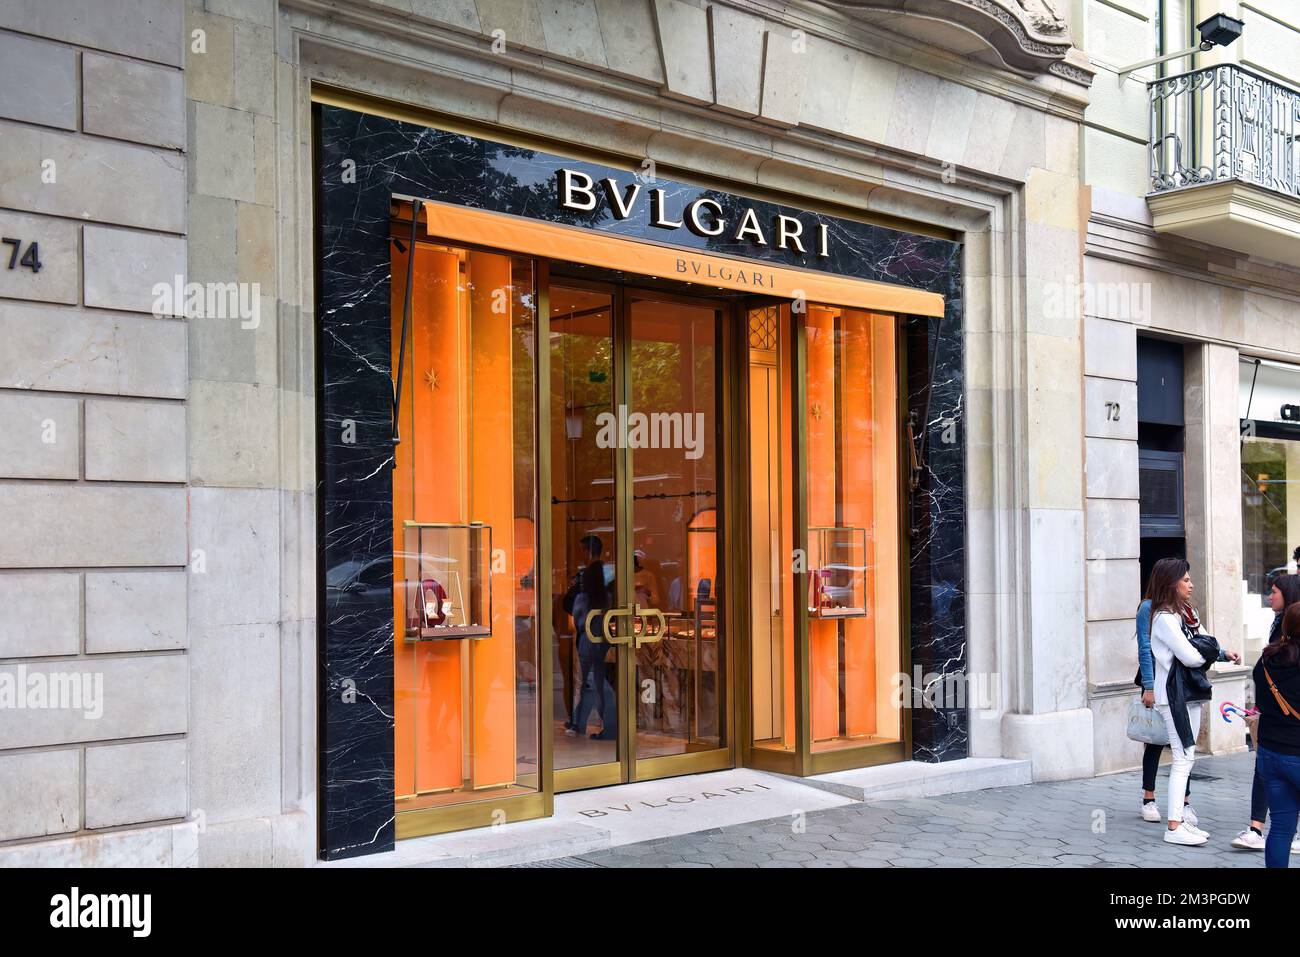 Barcelona, Spain - May 5, 2018: Bulgari, branded as BVLGARI, store on Passeig de Gracia, is an Italian luxury fashion house known  for its jewellery, Stock Photo